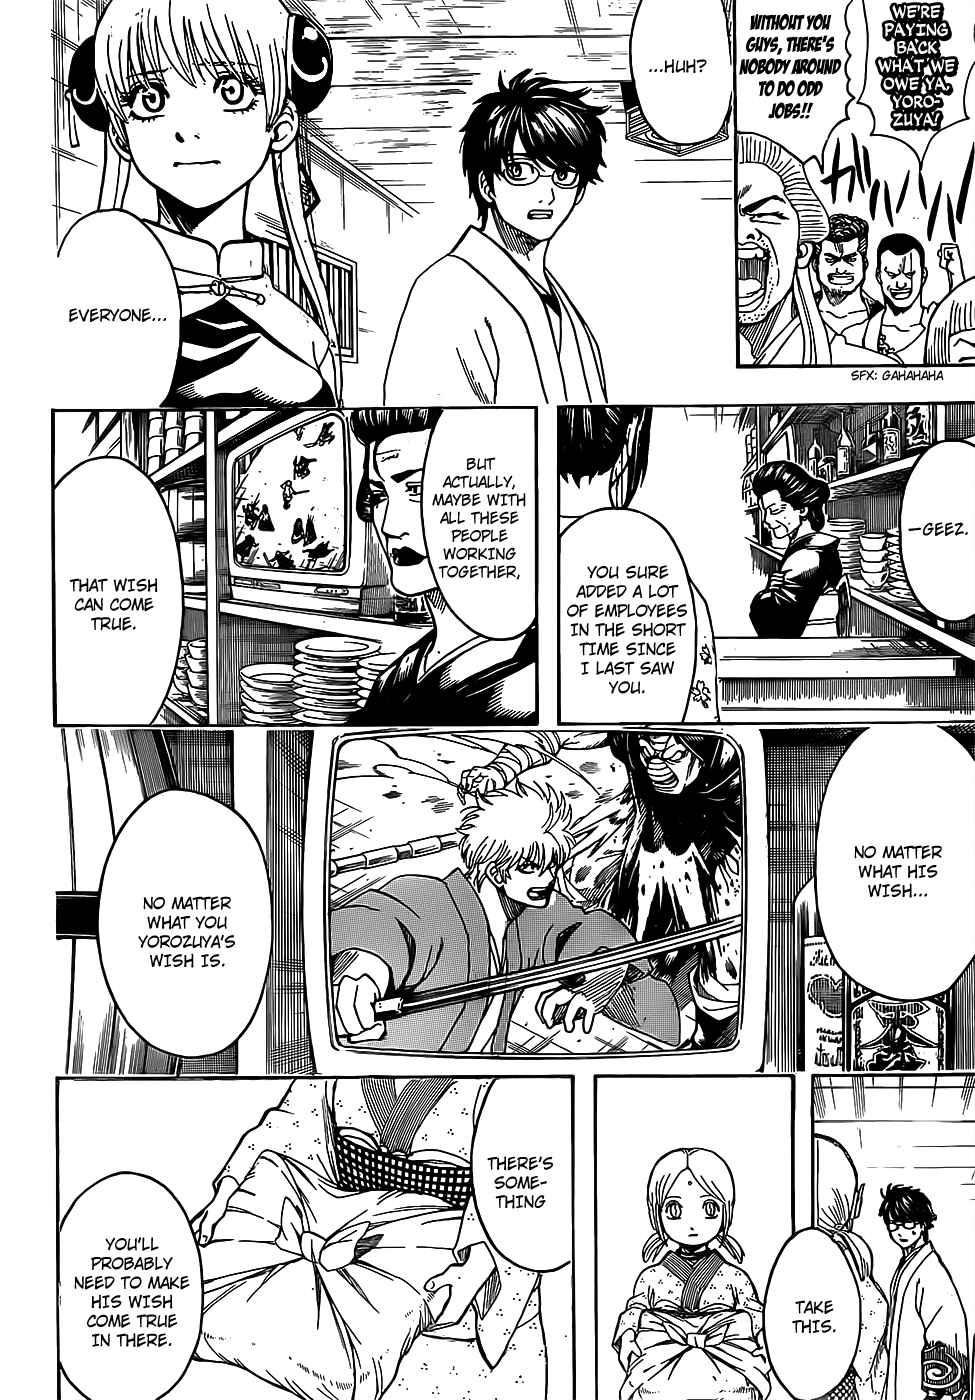 Gintama Chapter 698 Page 4